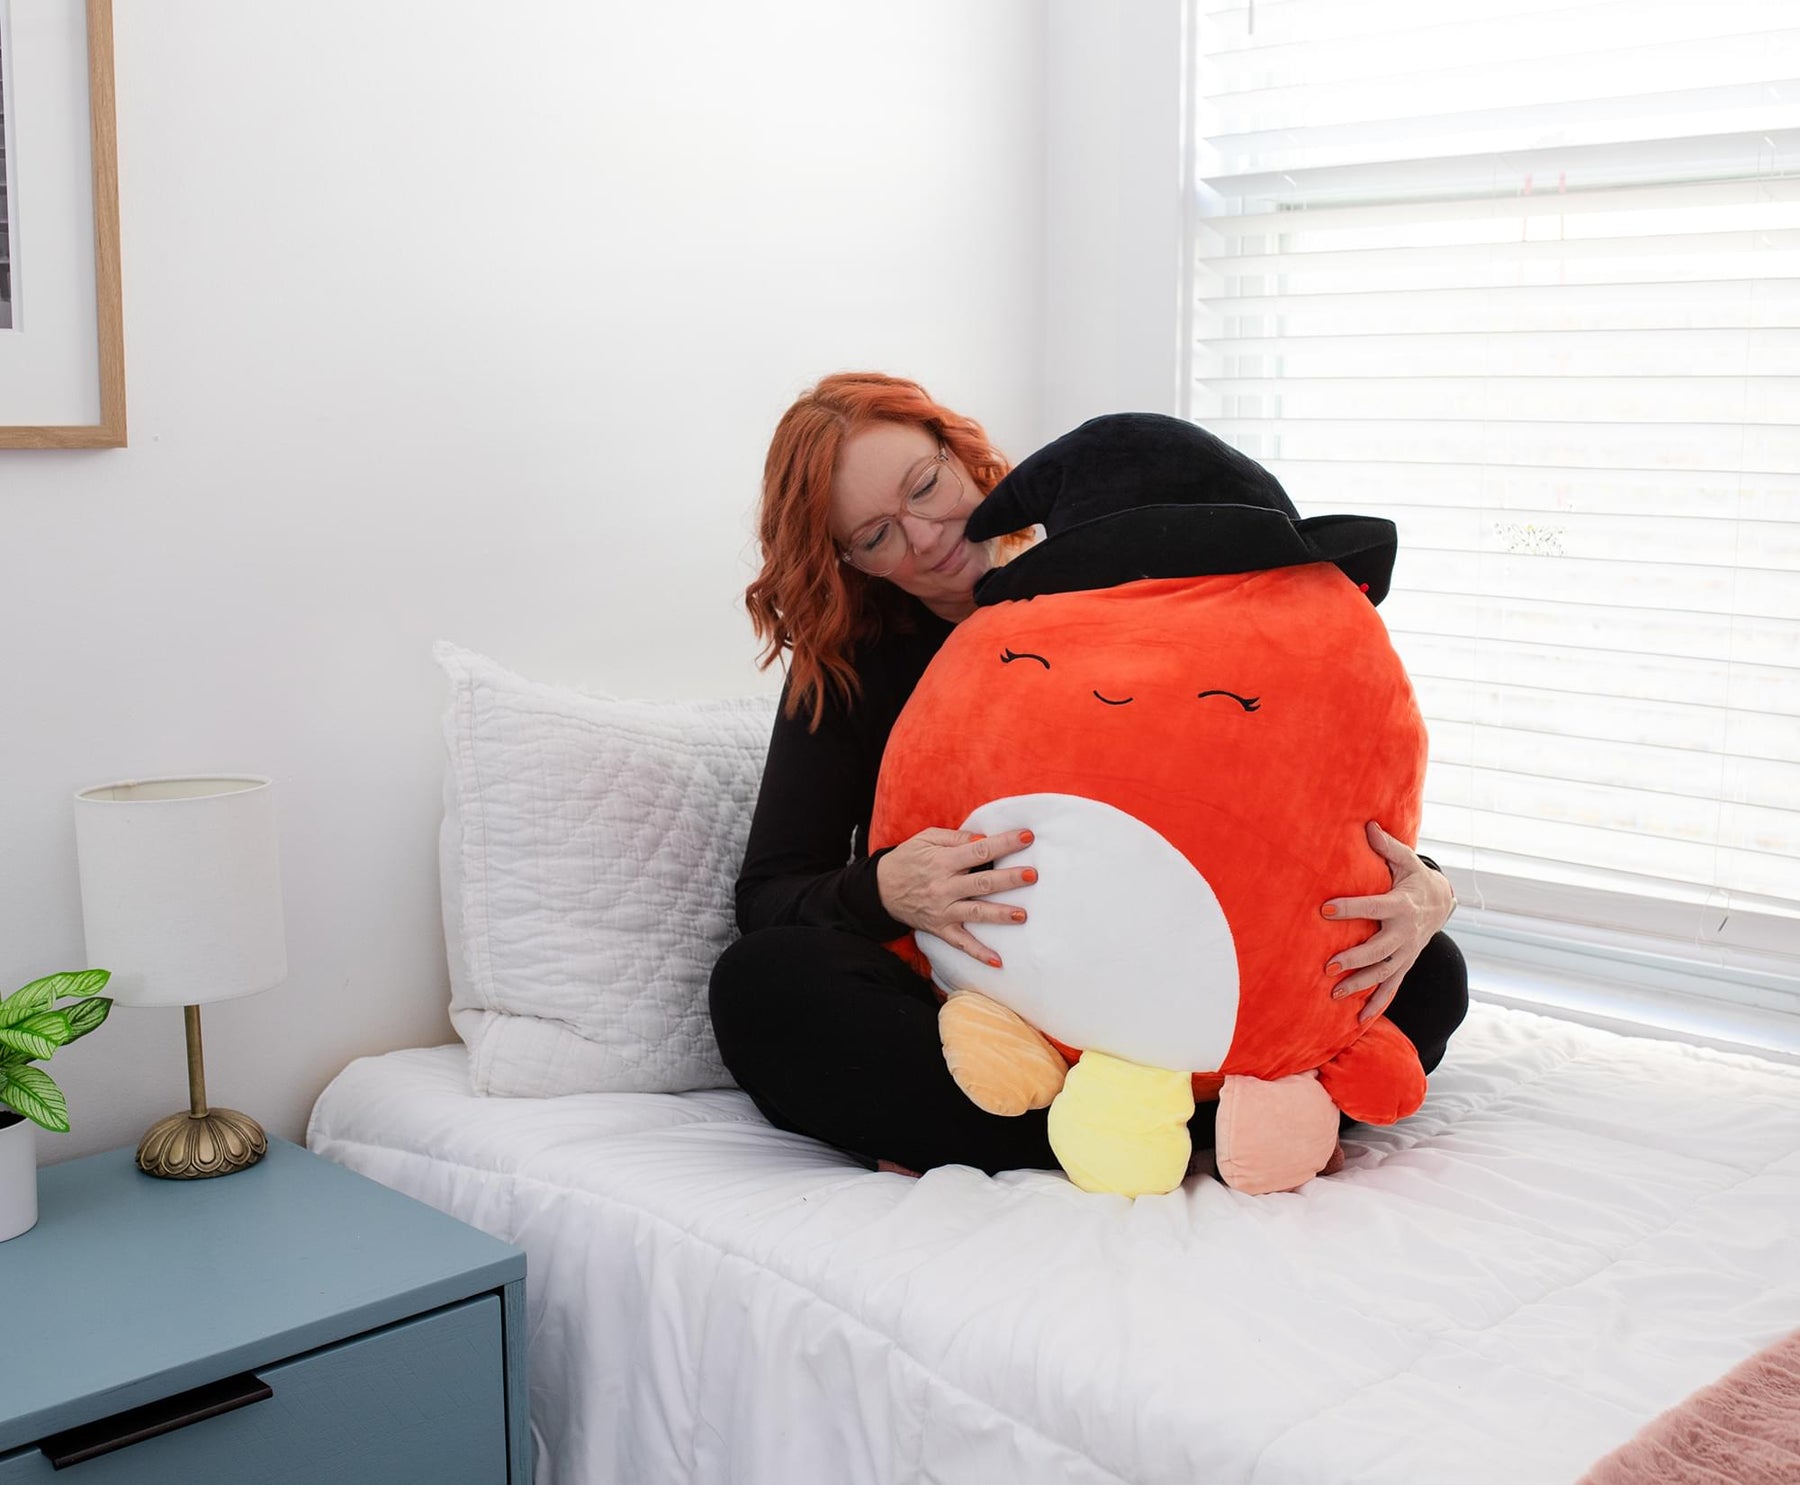 Squishmallow 20 Inch Halloween Plush | Detra the Octopus Witch